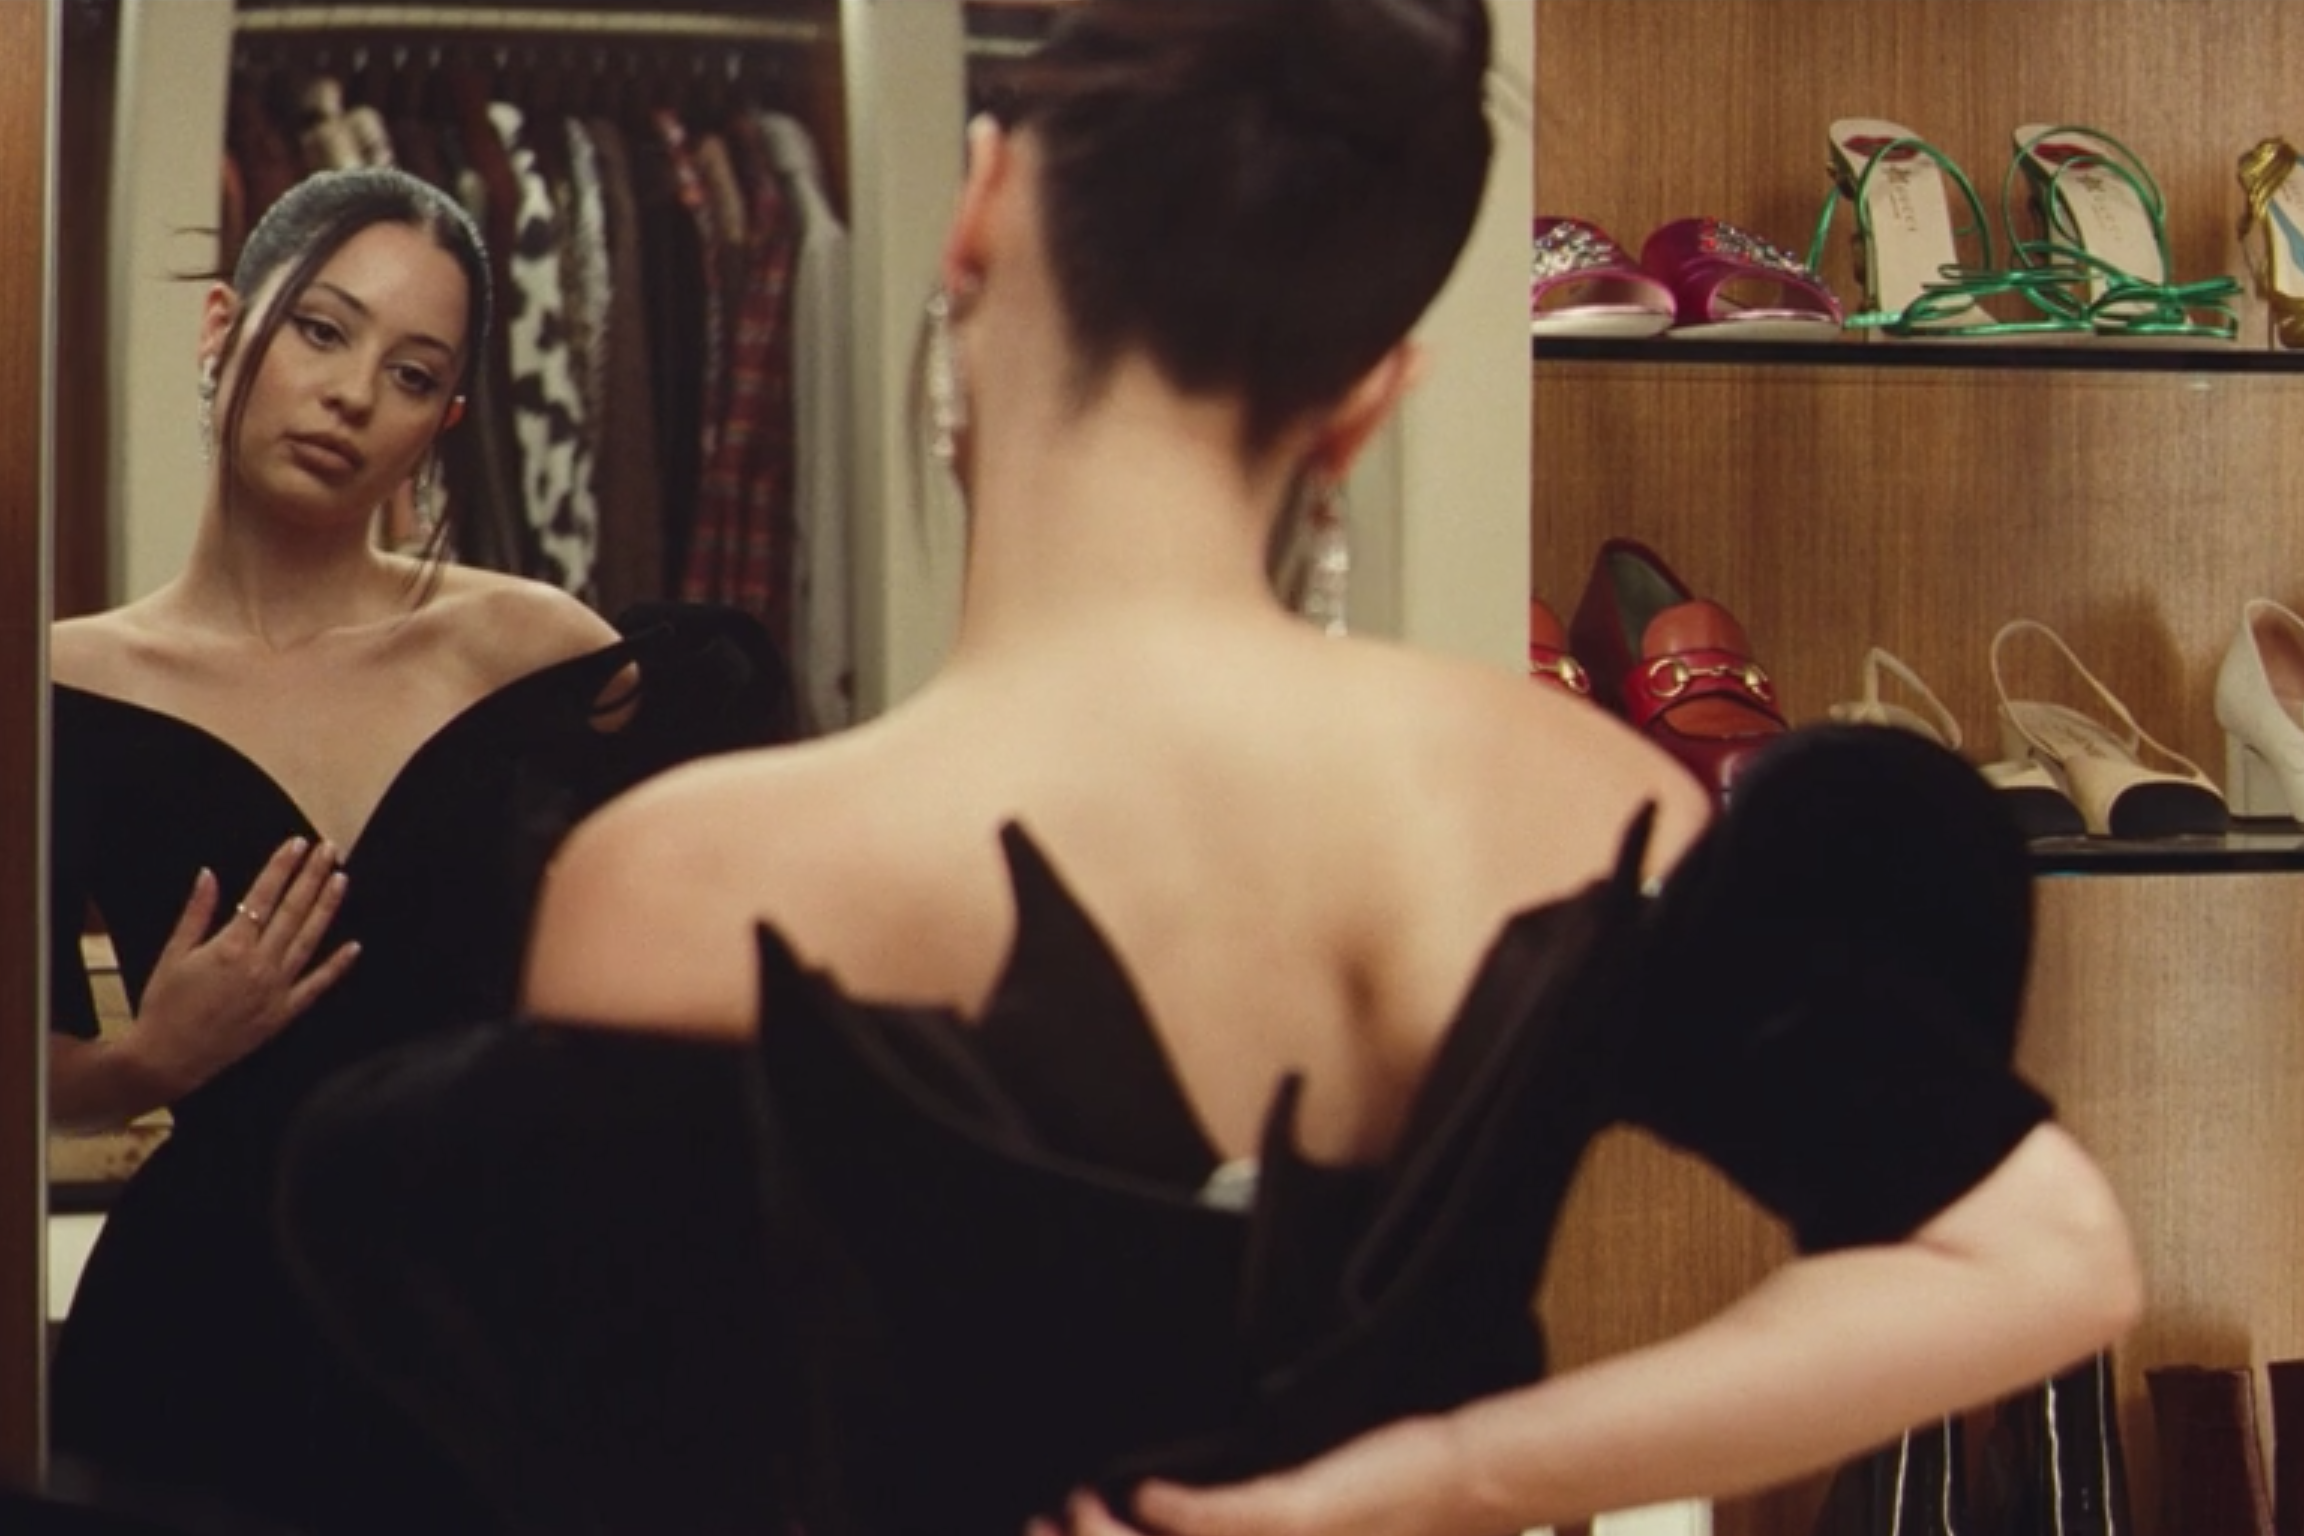 A girl tries on a black dress and looks at herself in the mirror.